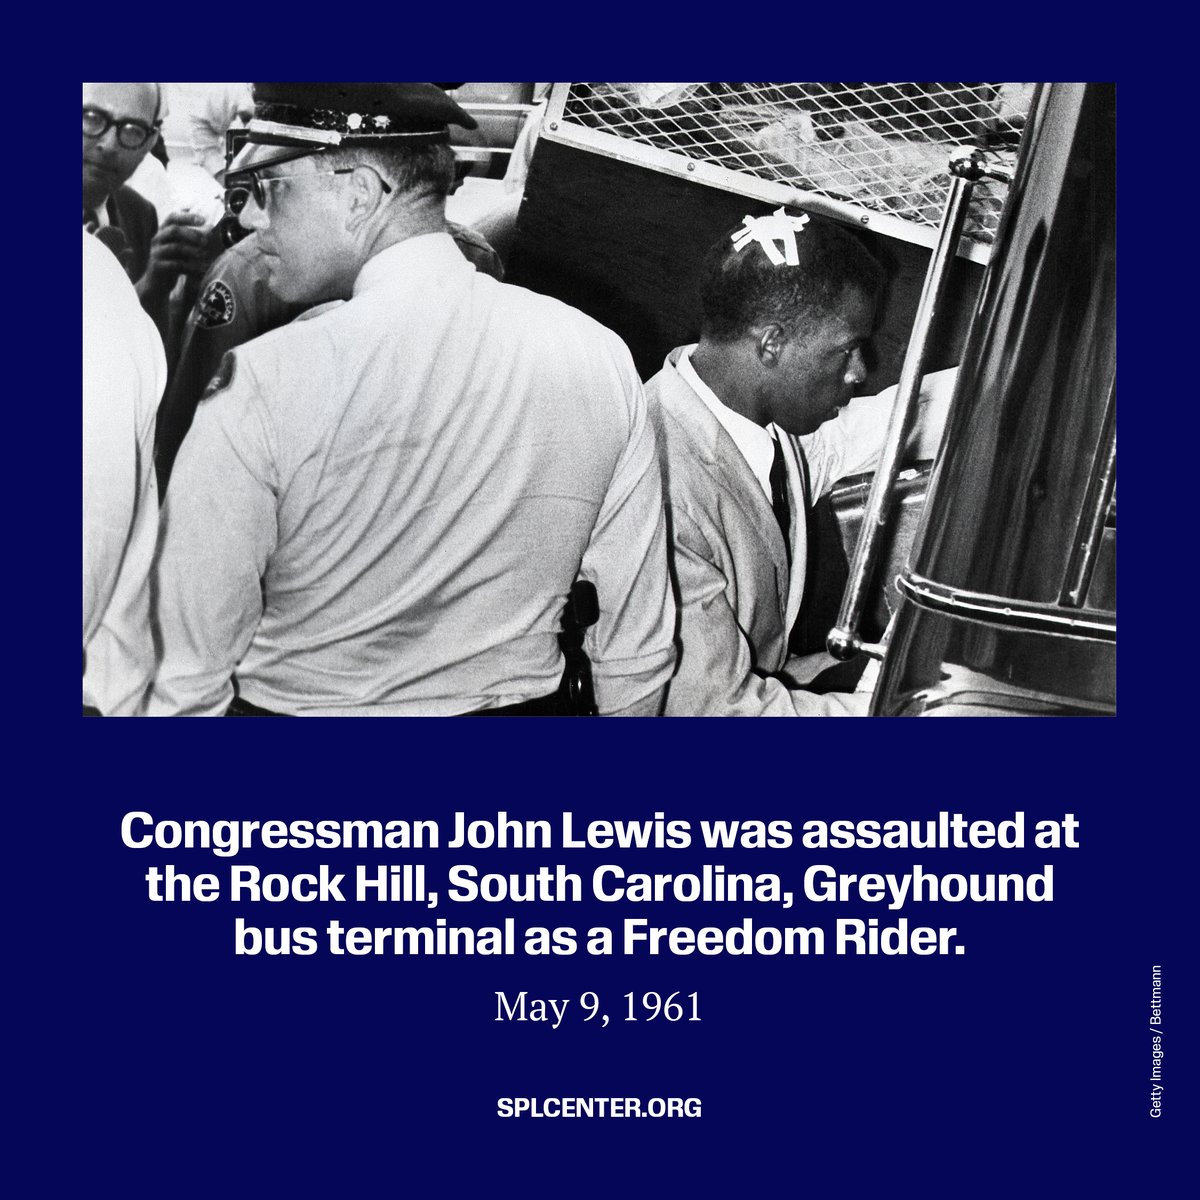 #OTD in 1961, civil rights activist and later U.S. Rep. John Lewis was severely beaten at the Rock Hill, South Carolina, Greyhound bus terminal. He was one of the Freedom Riders headed to New Orleans to protest segregation in interstate transportation. #TheMarchContinues